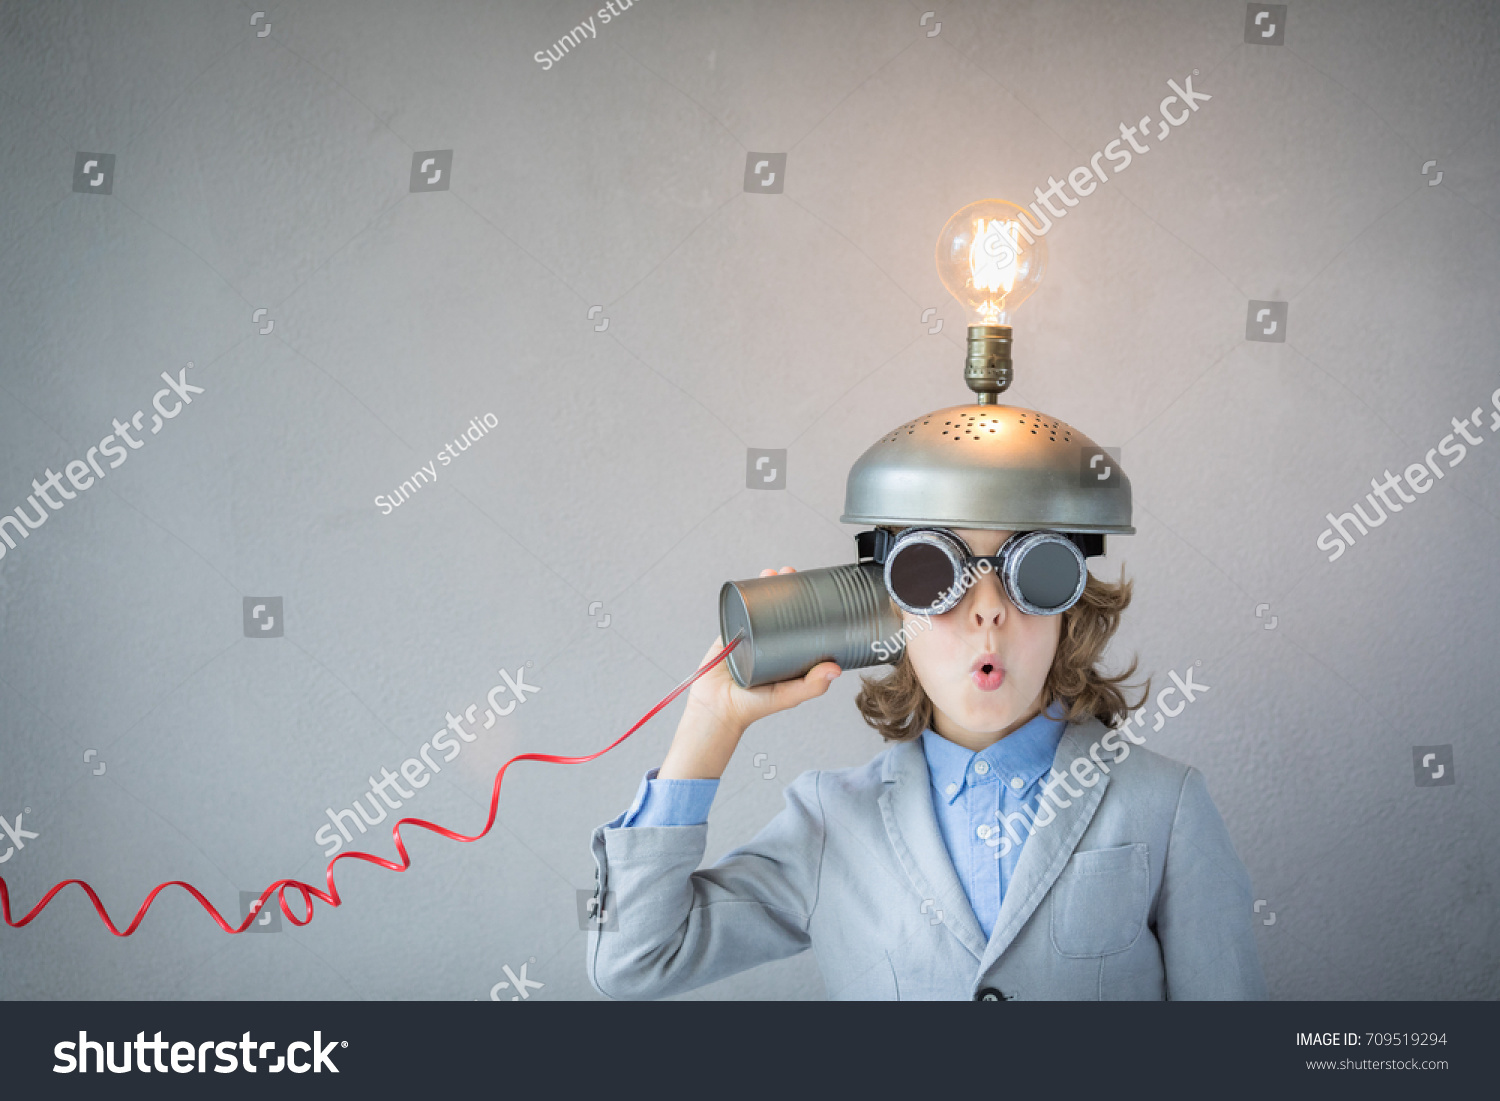 stock-photo-portrait-of-child-in-classroom-child-with-toy-virtual-reality-headset-in-class-funny-kid-with-709519294.jpg